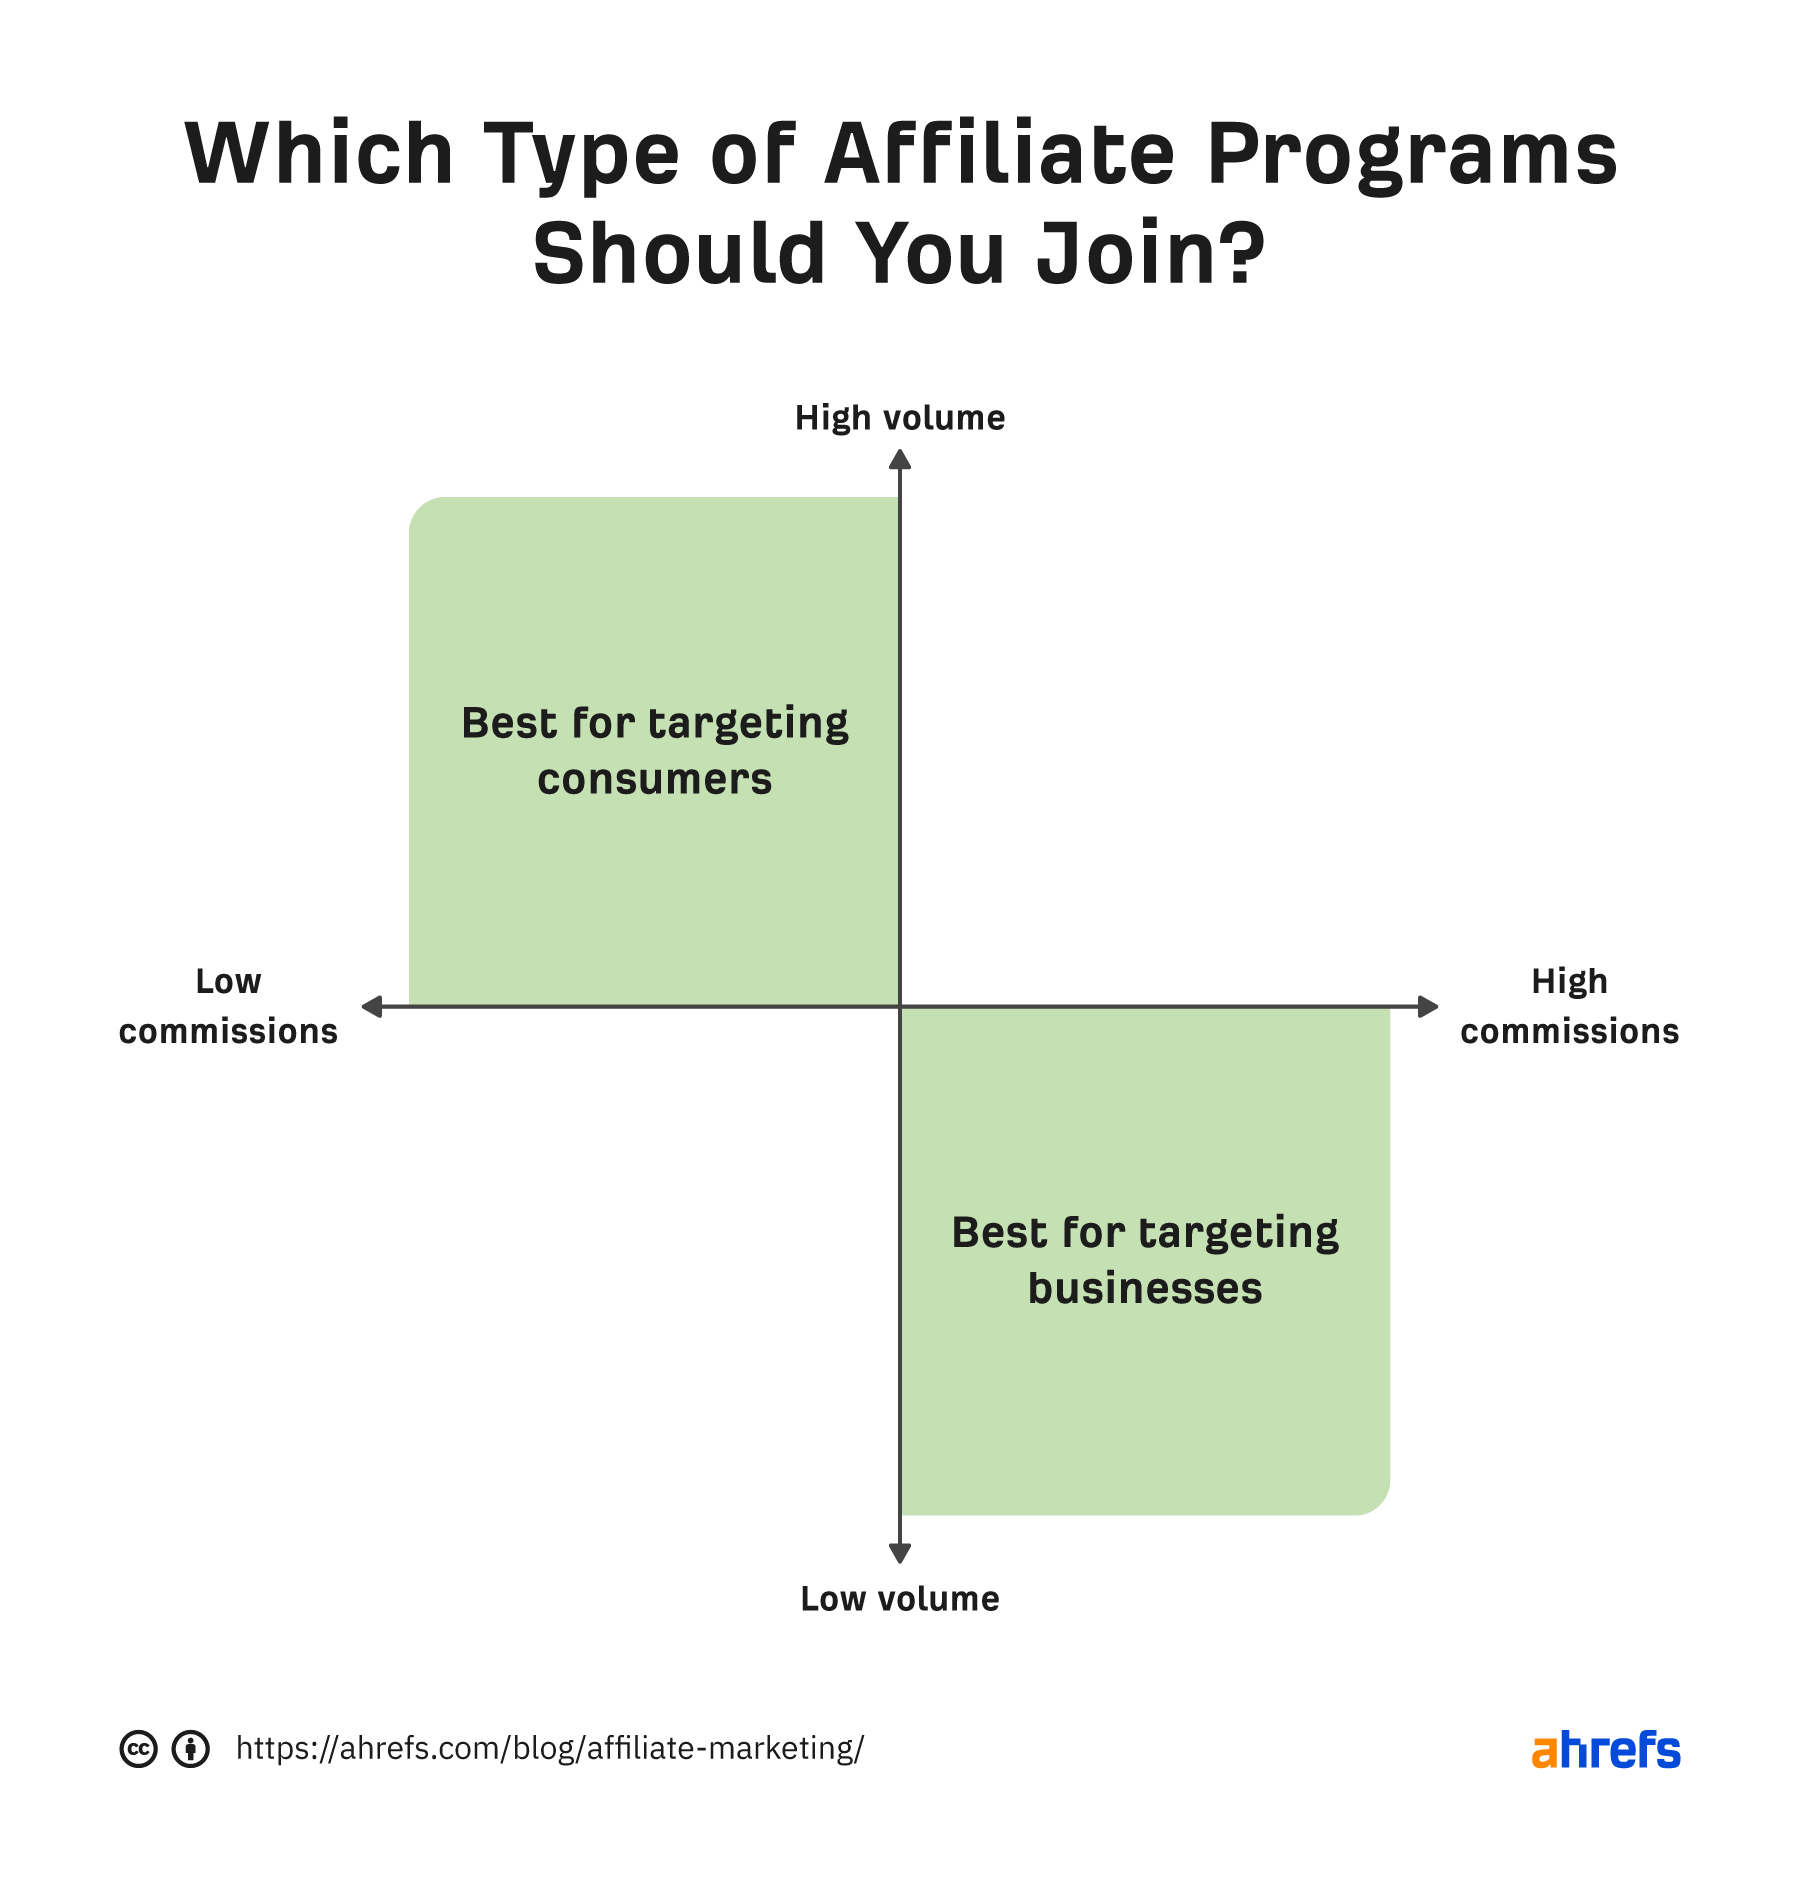 Which type of affiliate programs should you join?